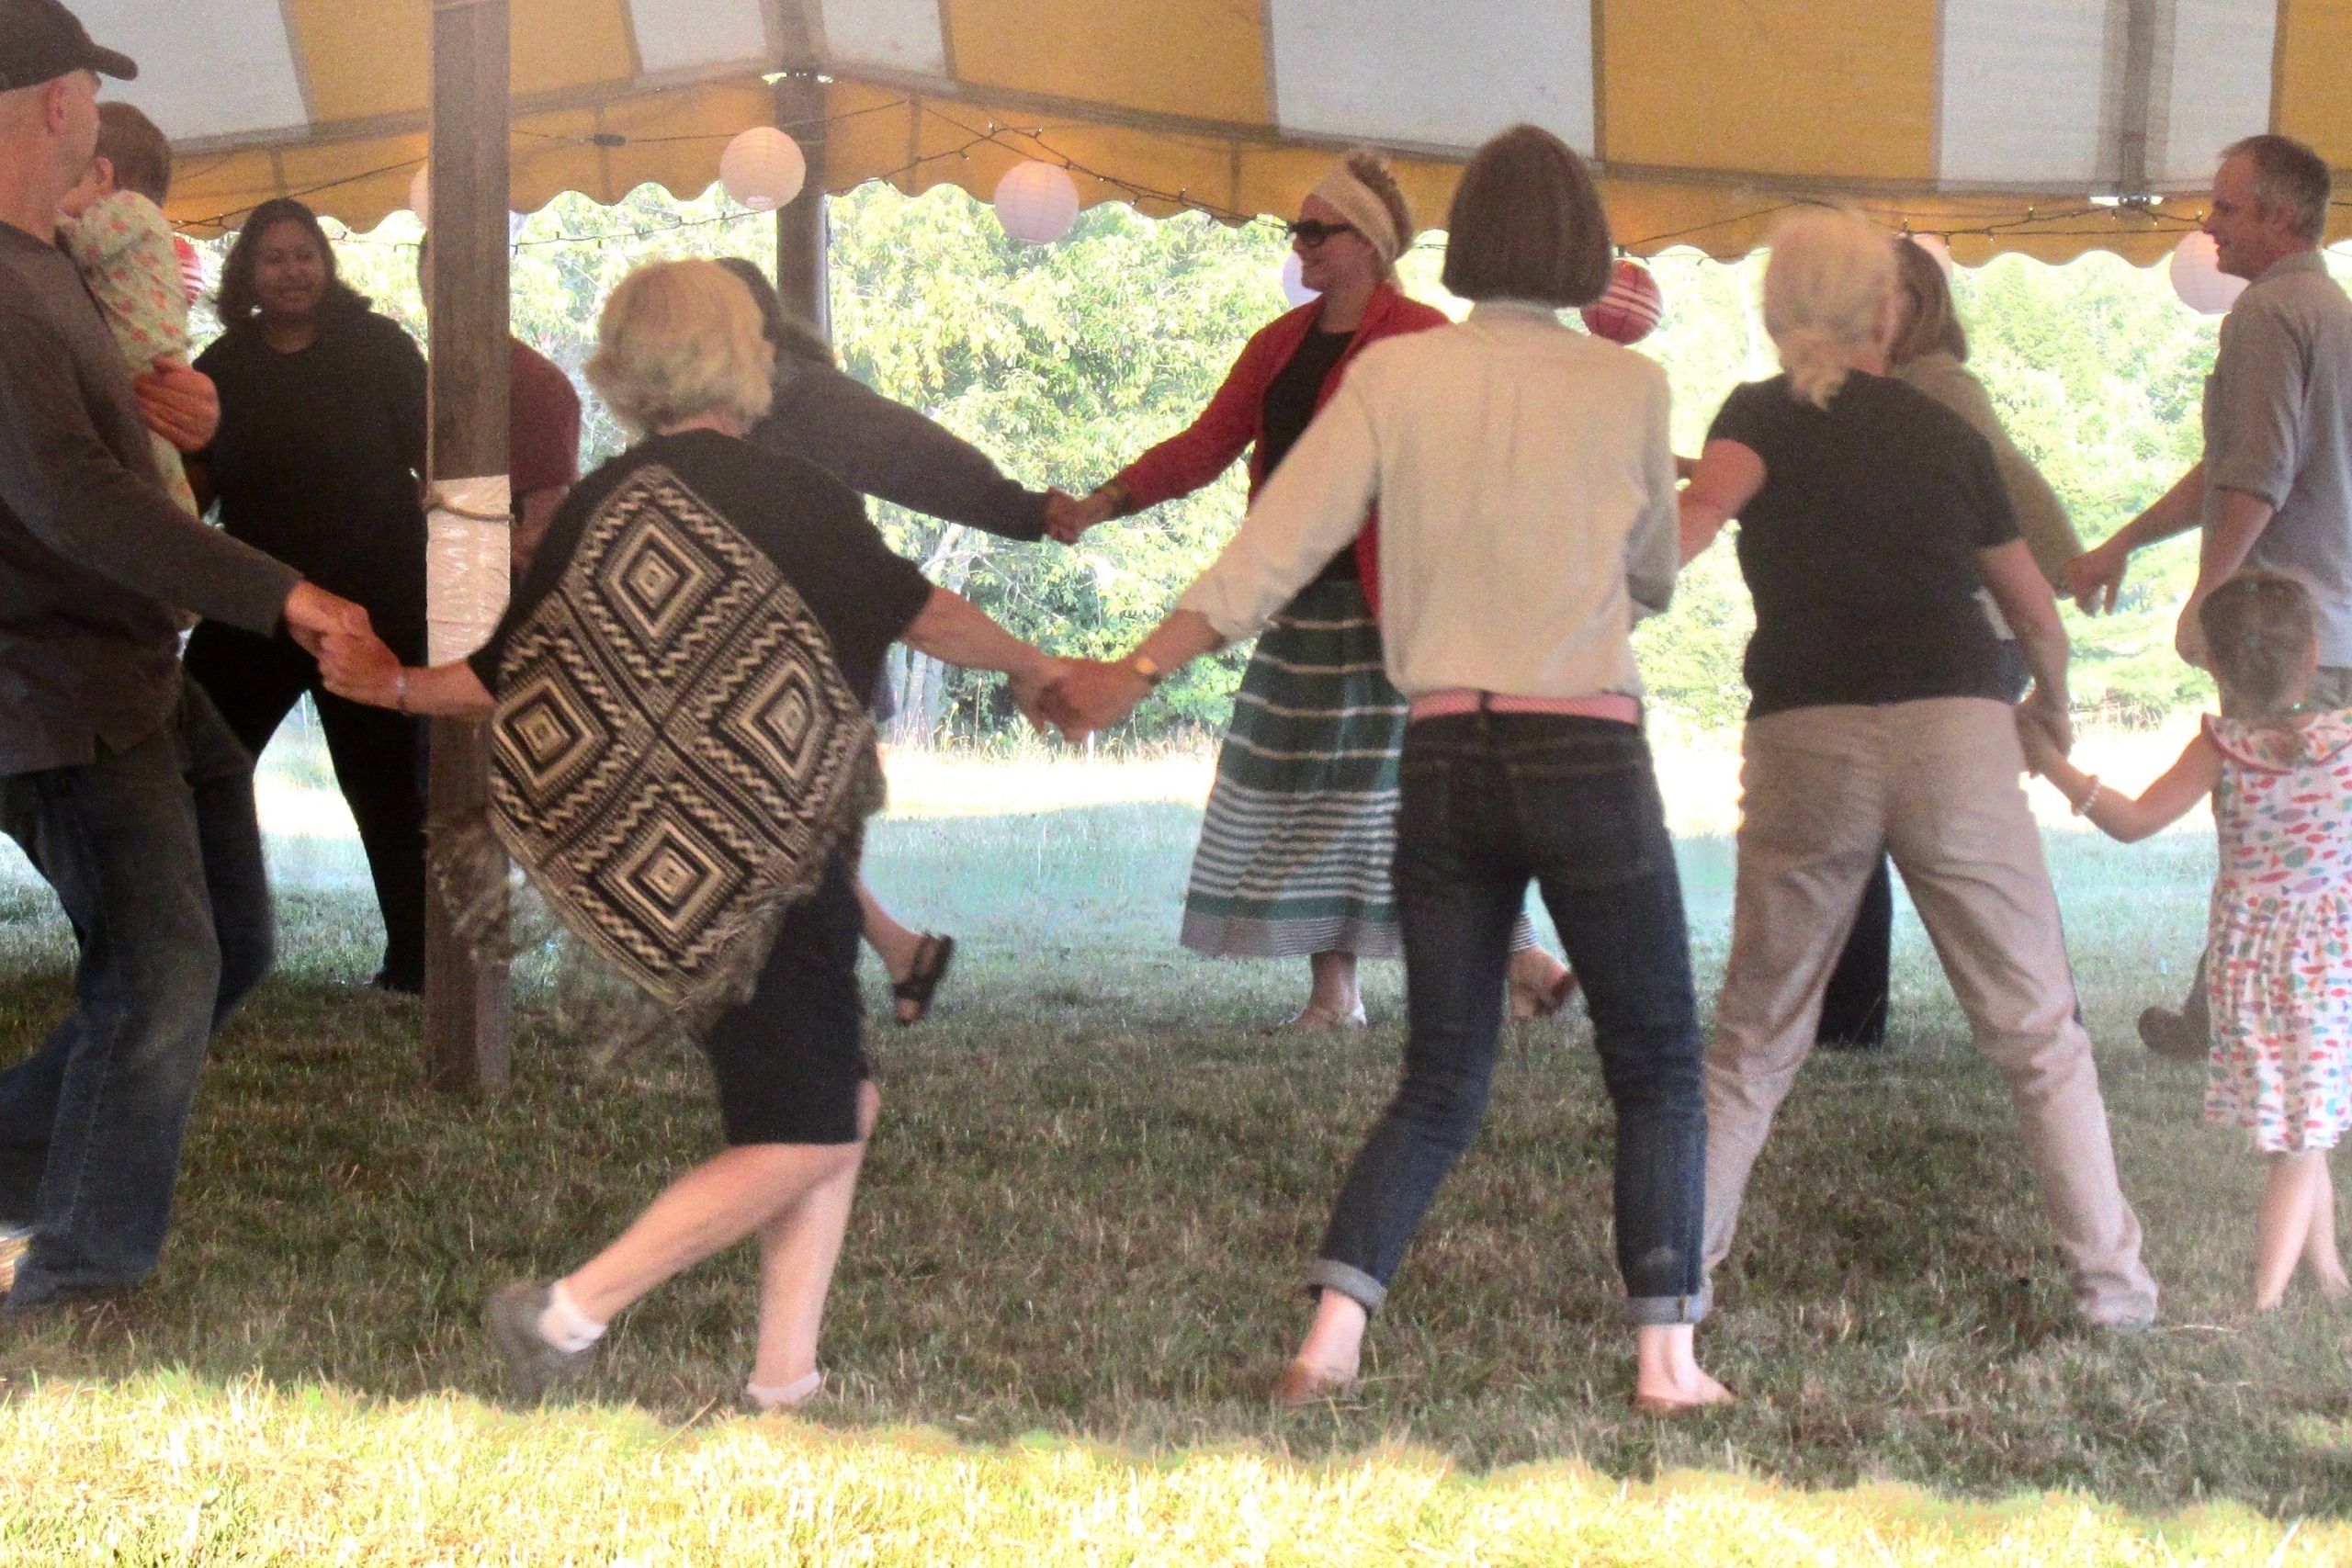 people of all ages at a farm event in Midcoast Maine dancing holding hands and dancing in a circle under a yellow and white striped tent.